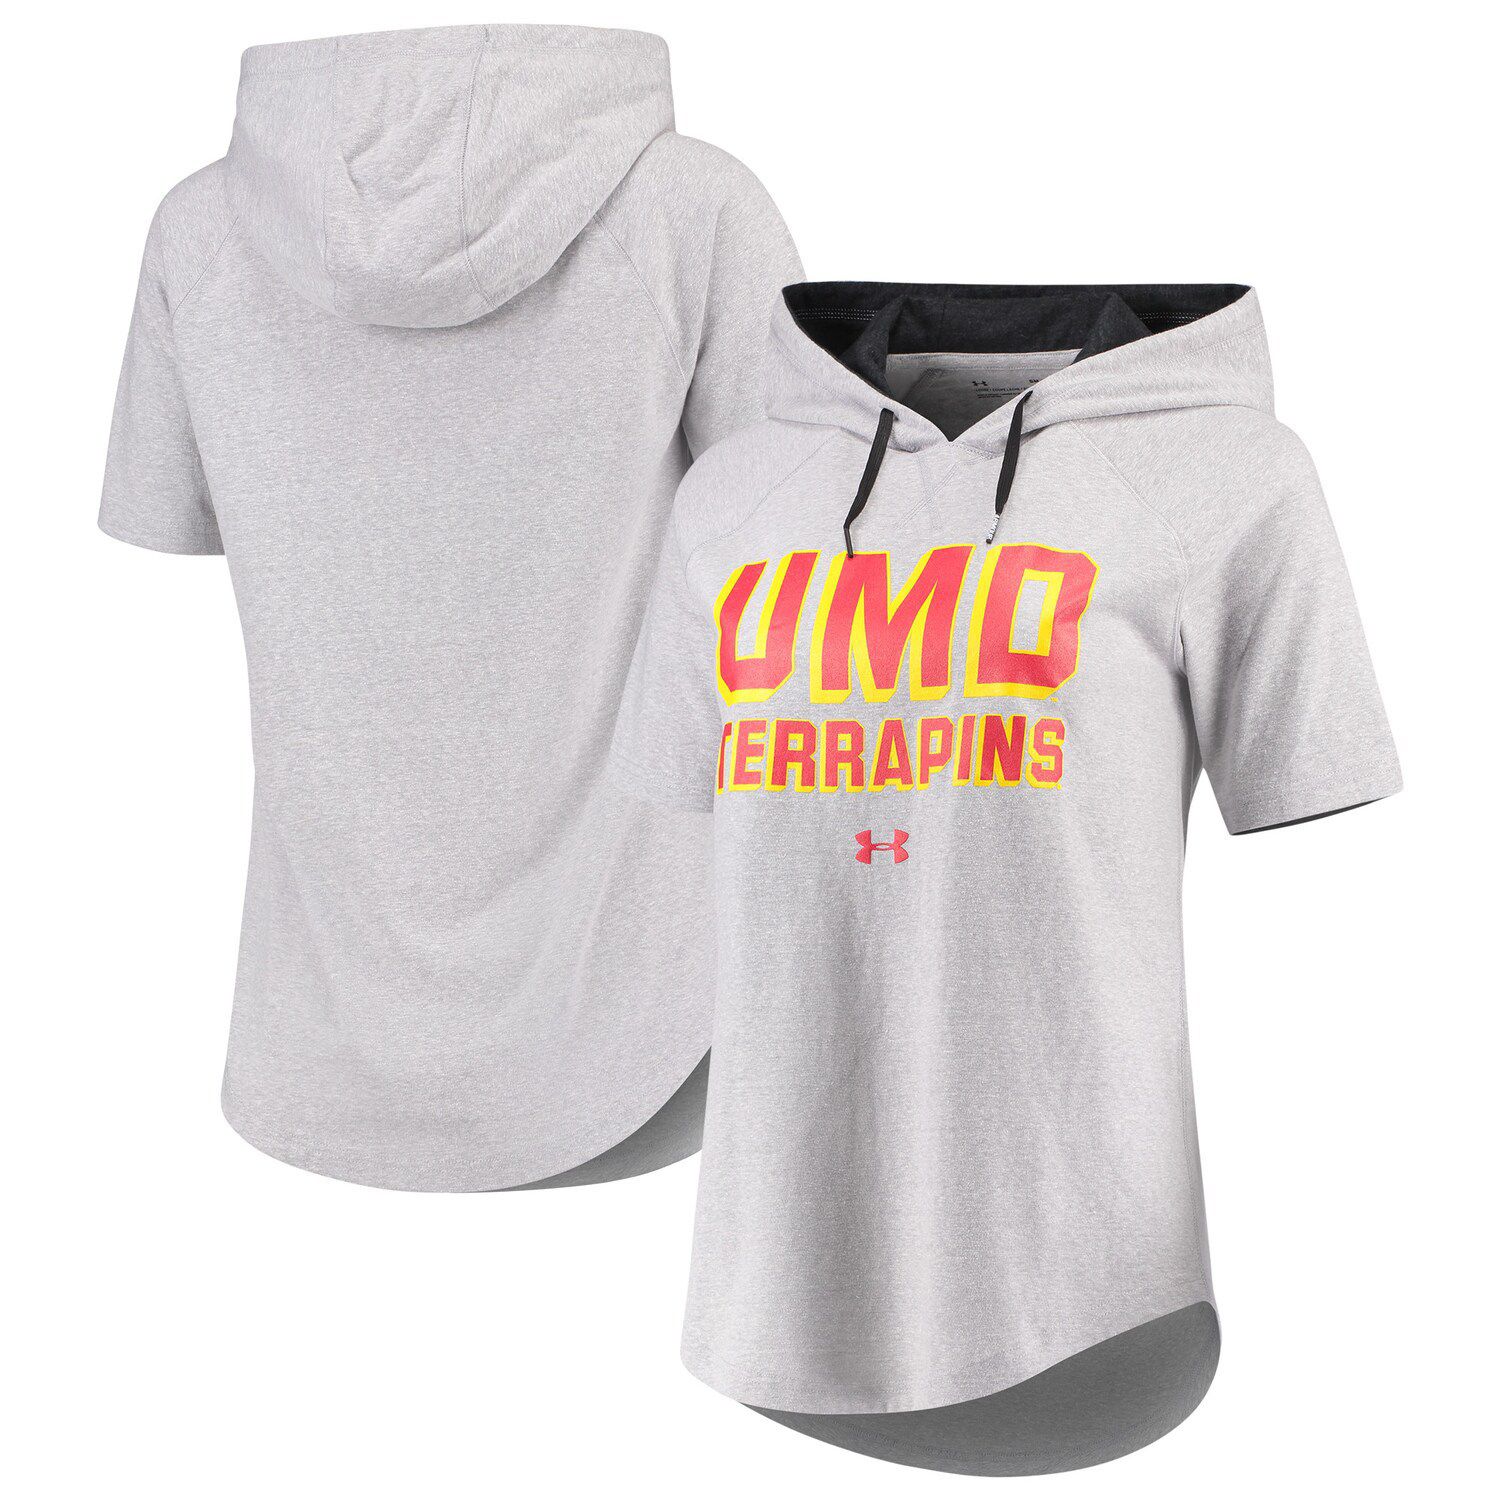 under armour hoodie t shirt